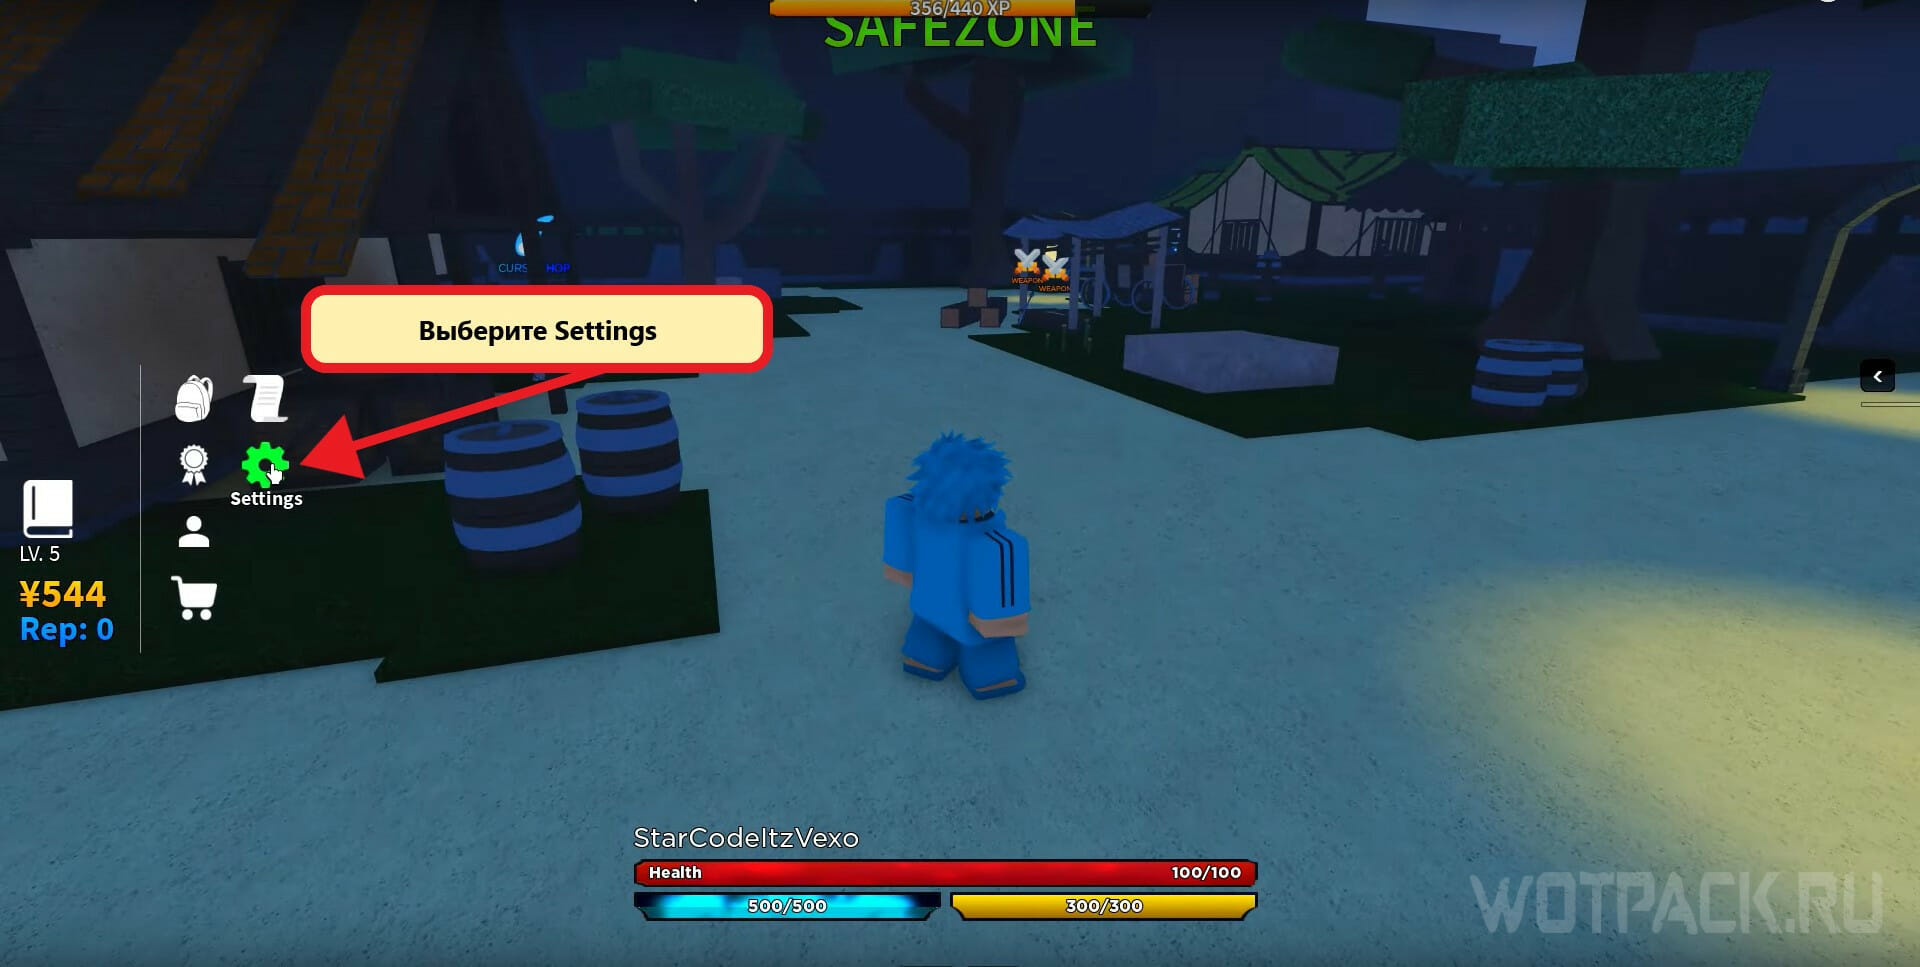 Roblox Kaizen codes for free Clan Spins in December 2023 - Charlie INTEL